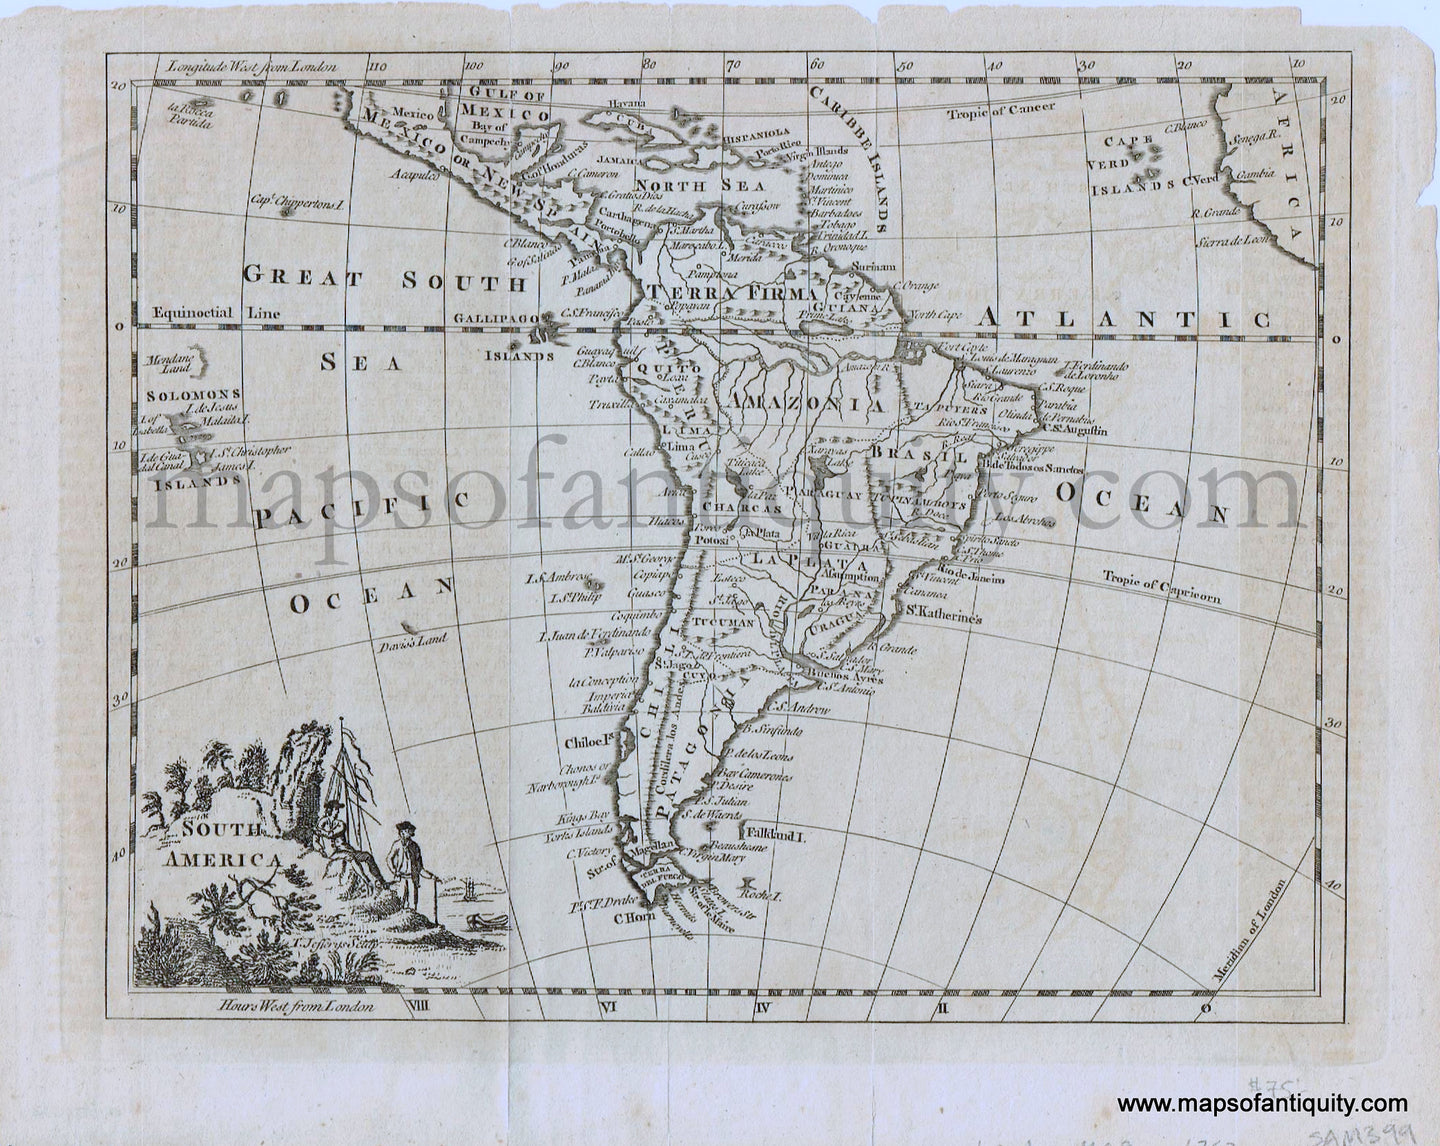 Antique-Black-and-White-Map-South-America-South-America-1762-Jefferys-/-London-Magazine--1700s-18th-century-Maps-of-Antiquity